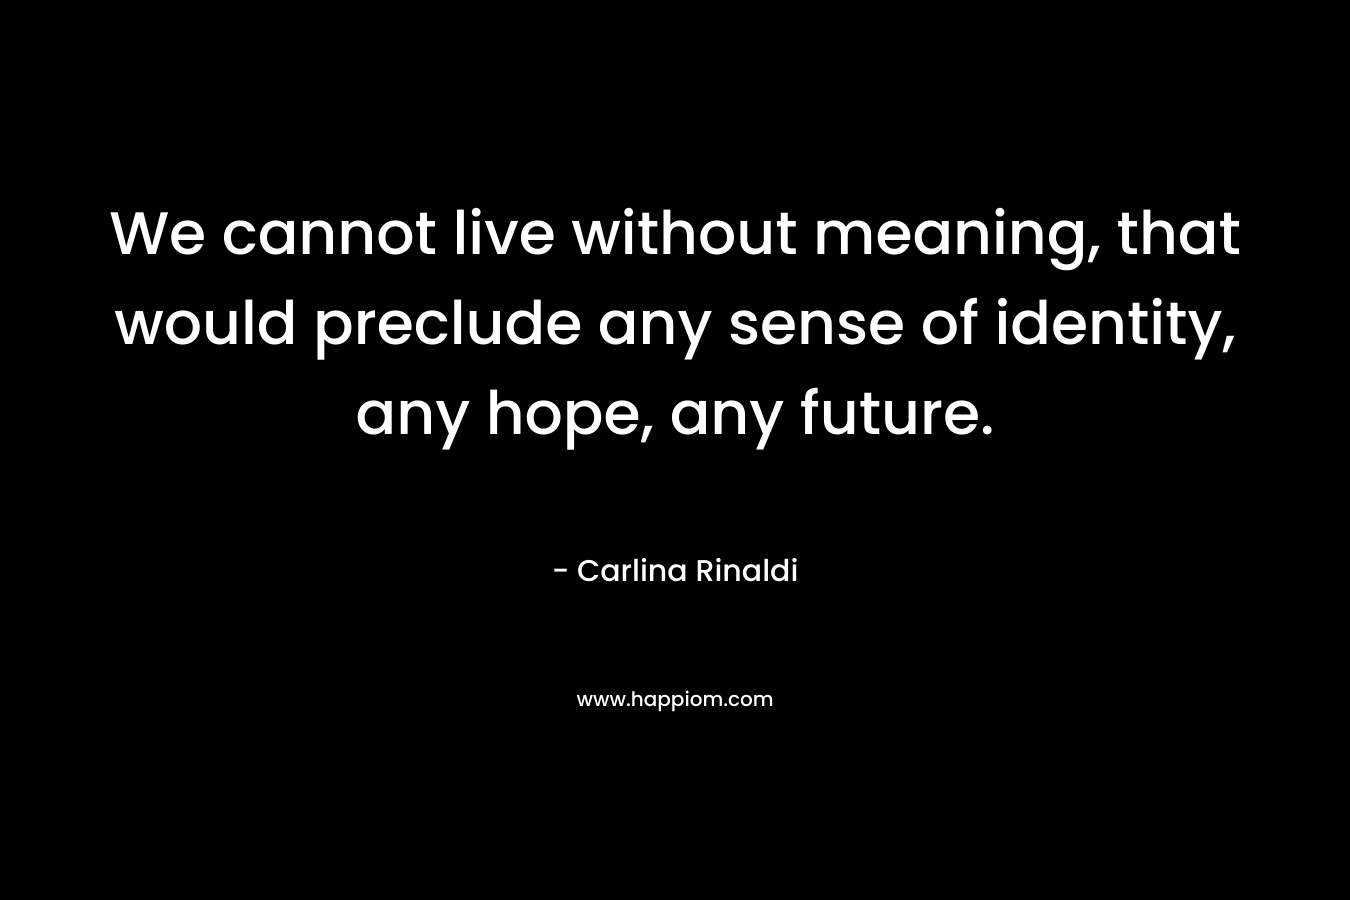 We cannot live without meaning, that would preclude any sense of identity, any hope, any future.